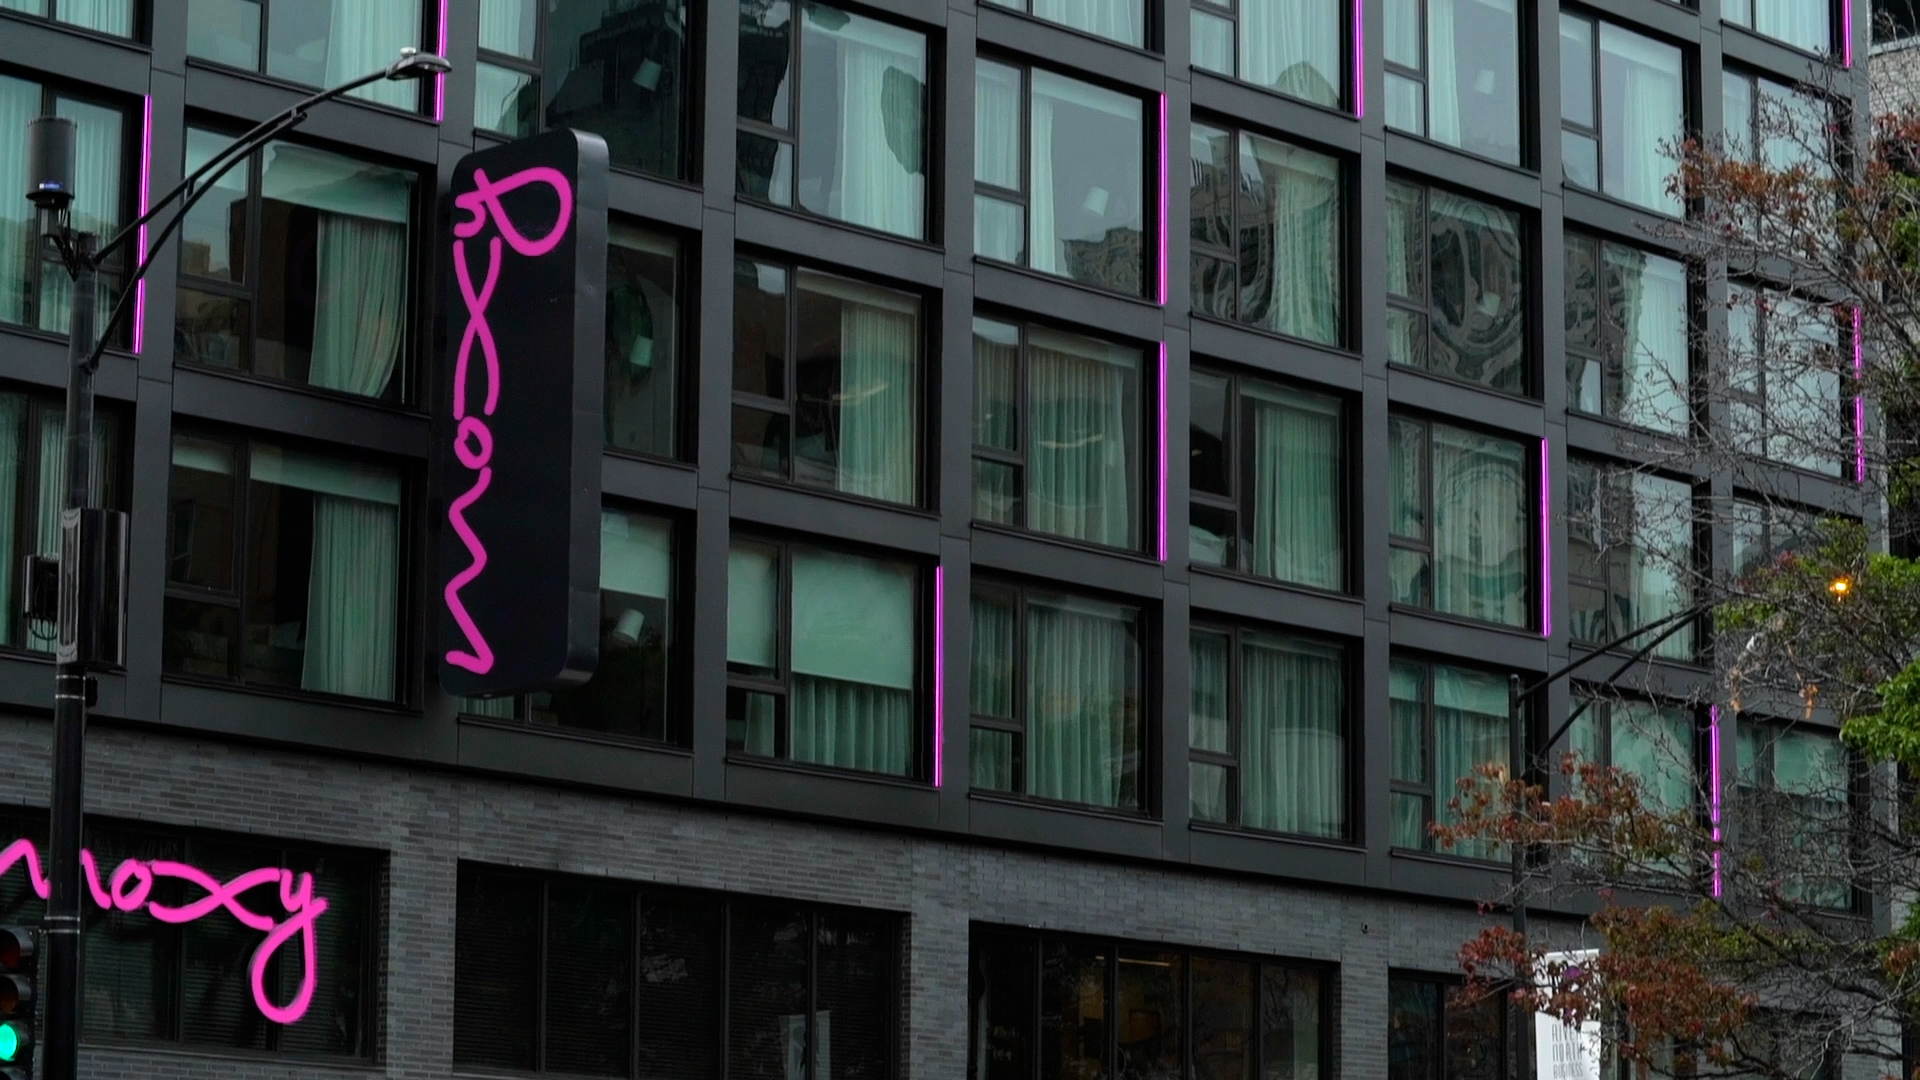 close up of a modern architecture facade with metal cladding and purple accents with Moxy written on signage